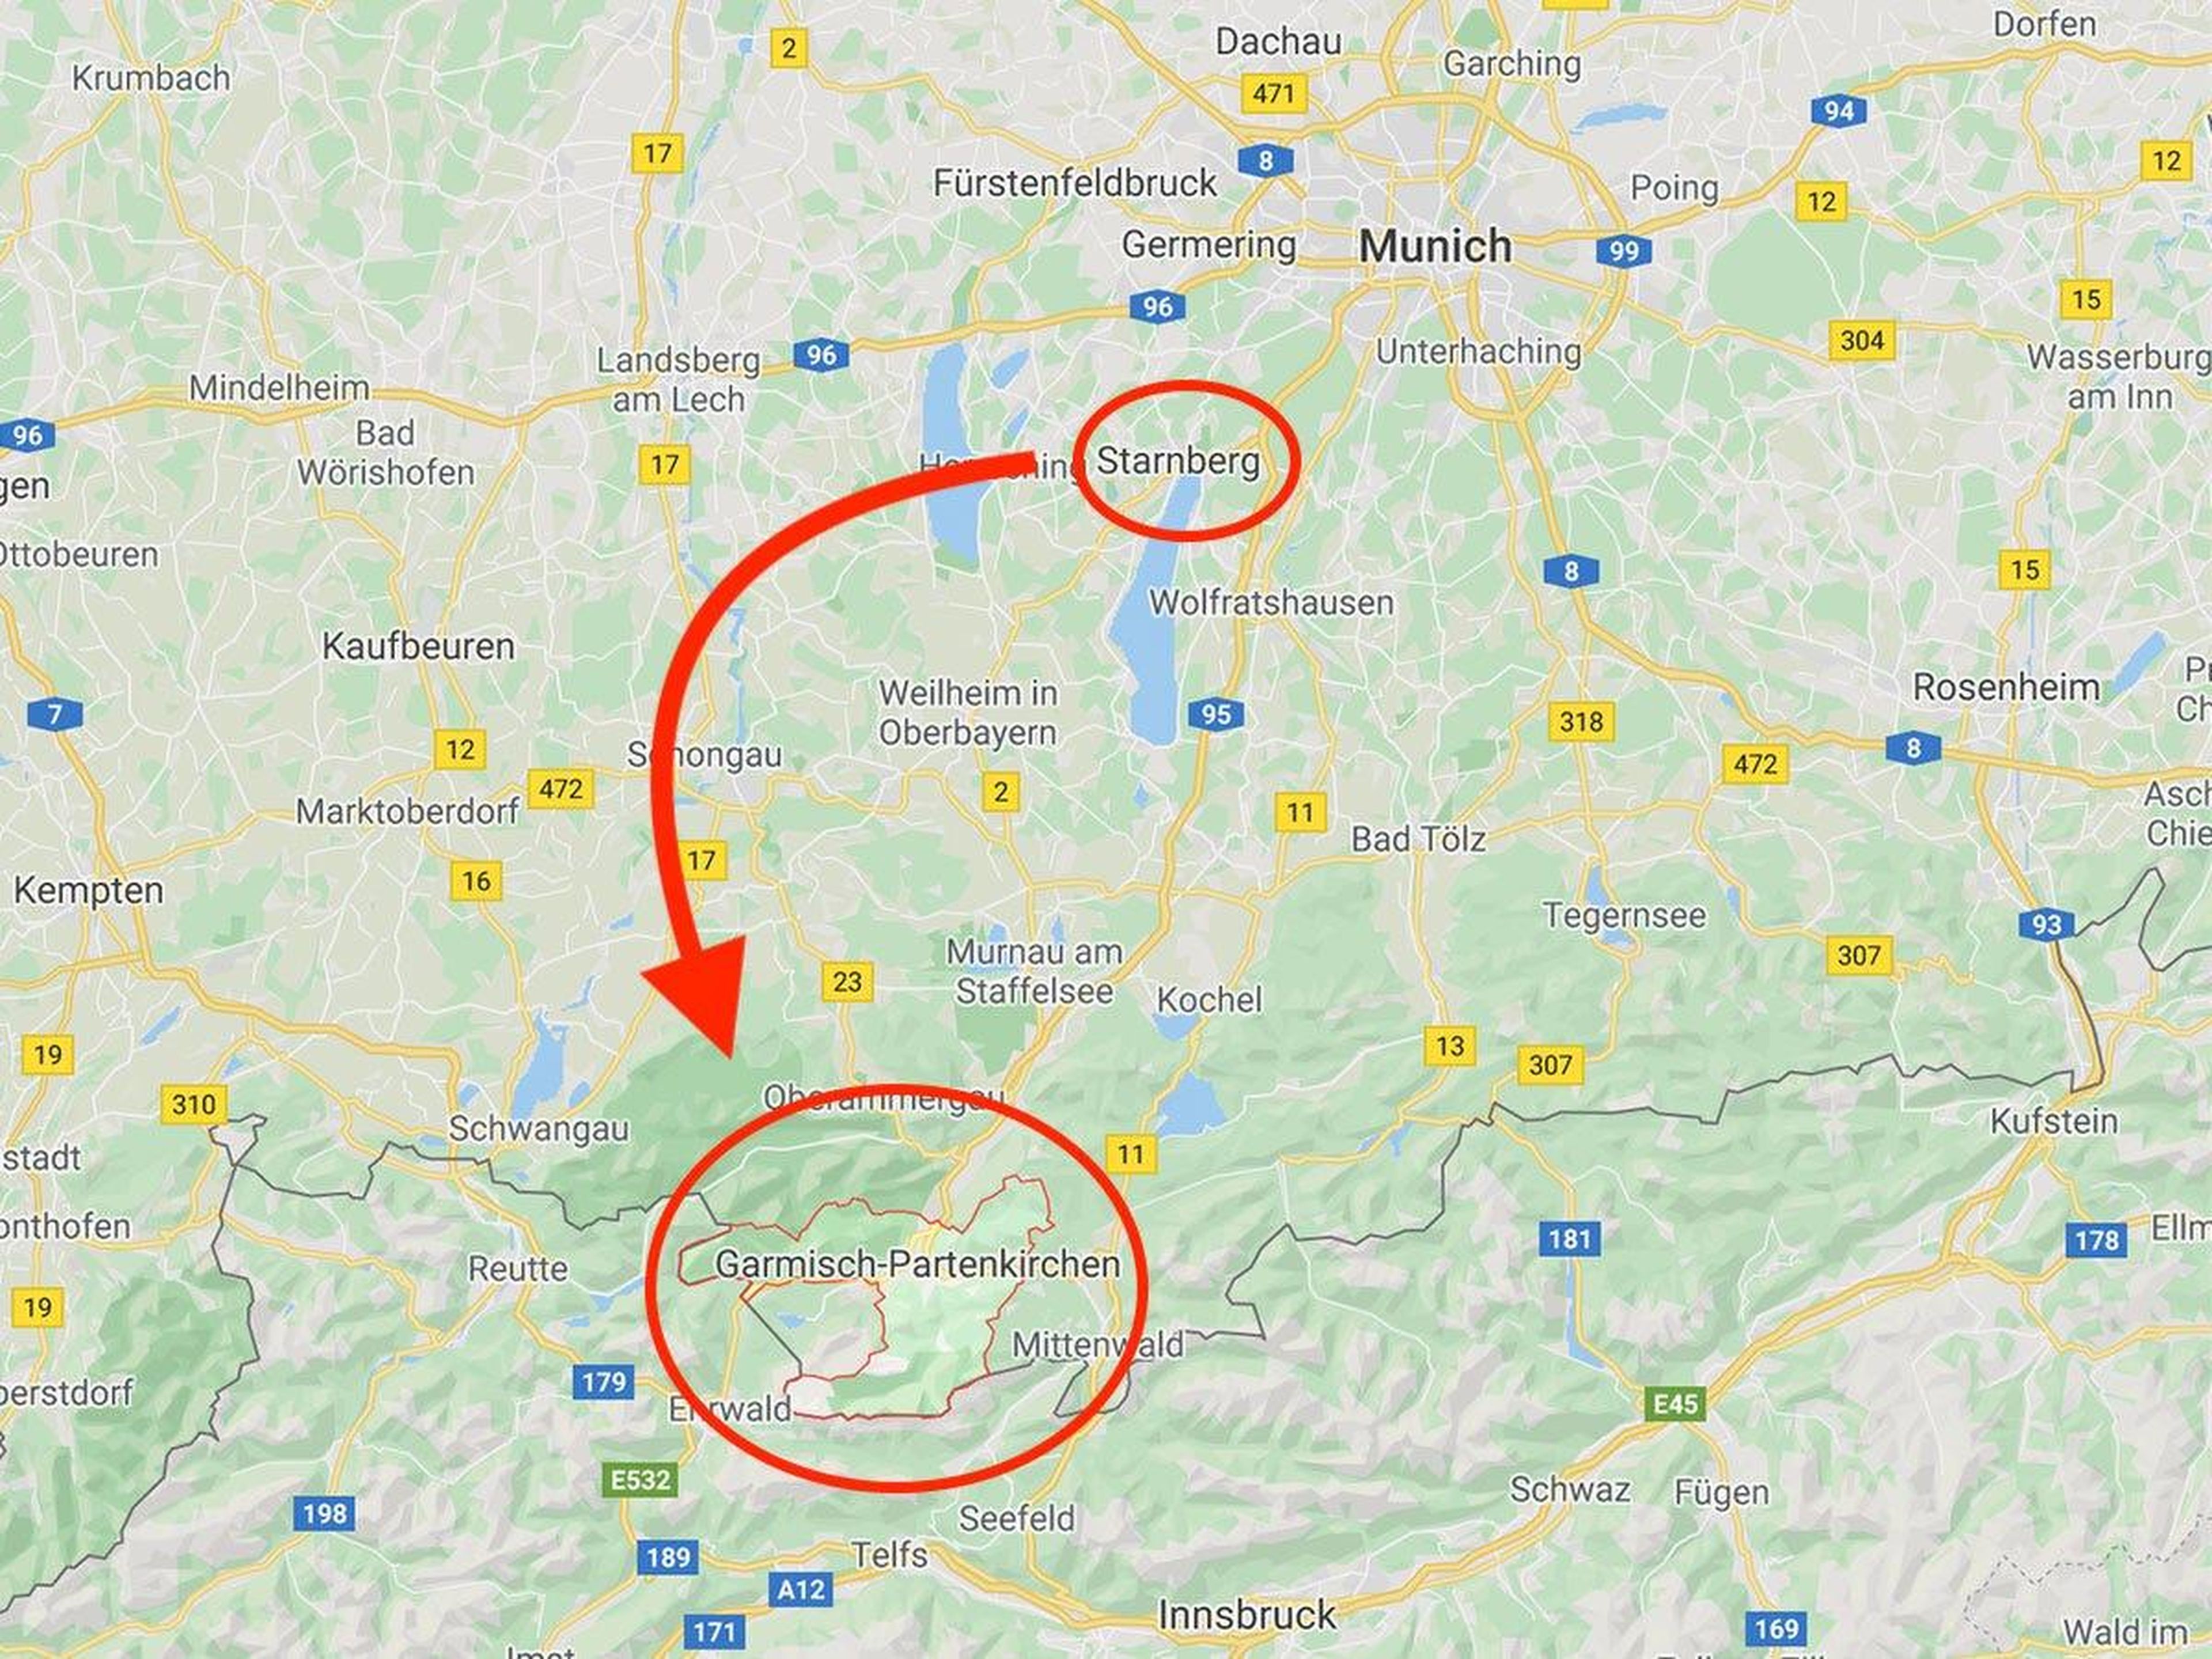 The Grand Hotel Sonnenbichl where the king and his female entourage are reportedly staying is located in Garmisch-Partenkirchen, about an hour south of Munich. Maha Vajiralongkorn is believed to own a lake house on nearby Lake